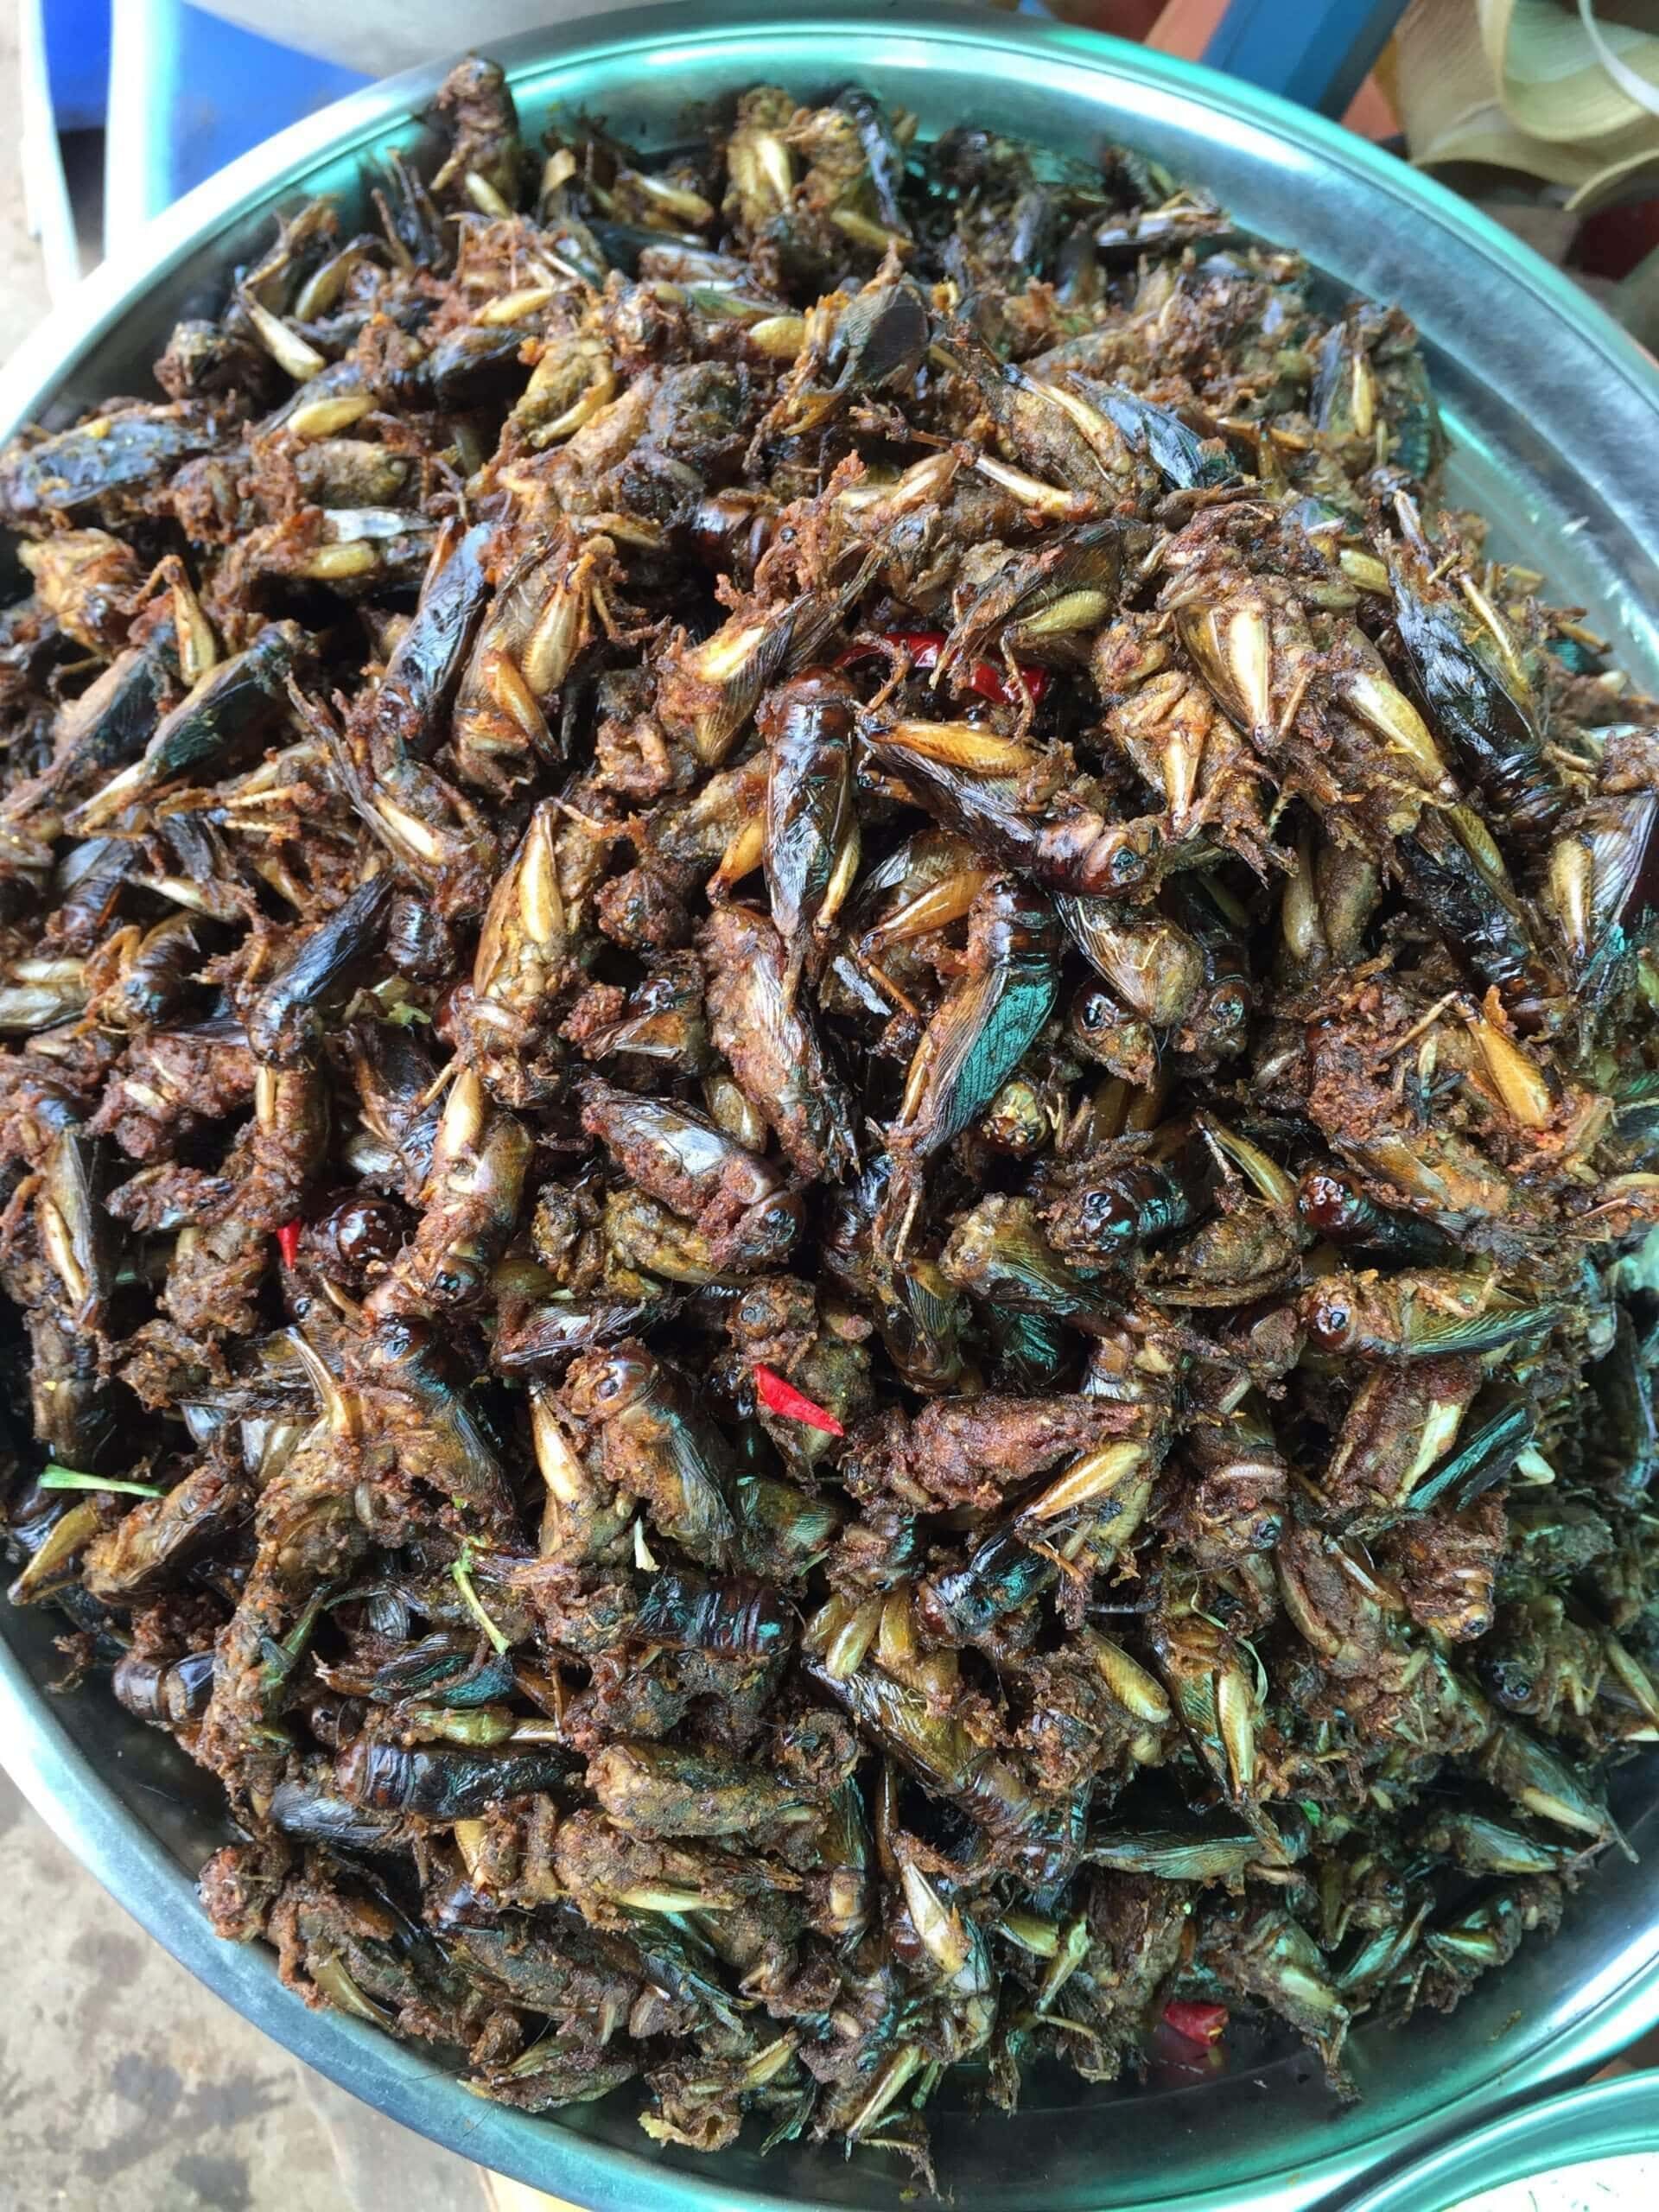 Insect food in Cambodia